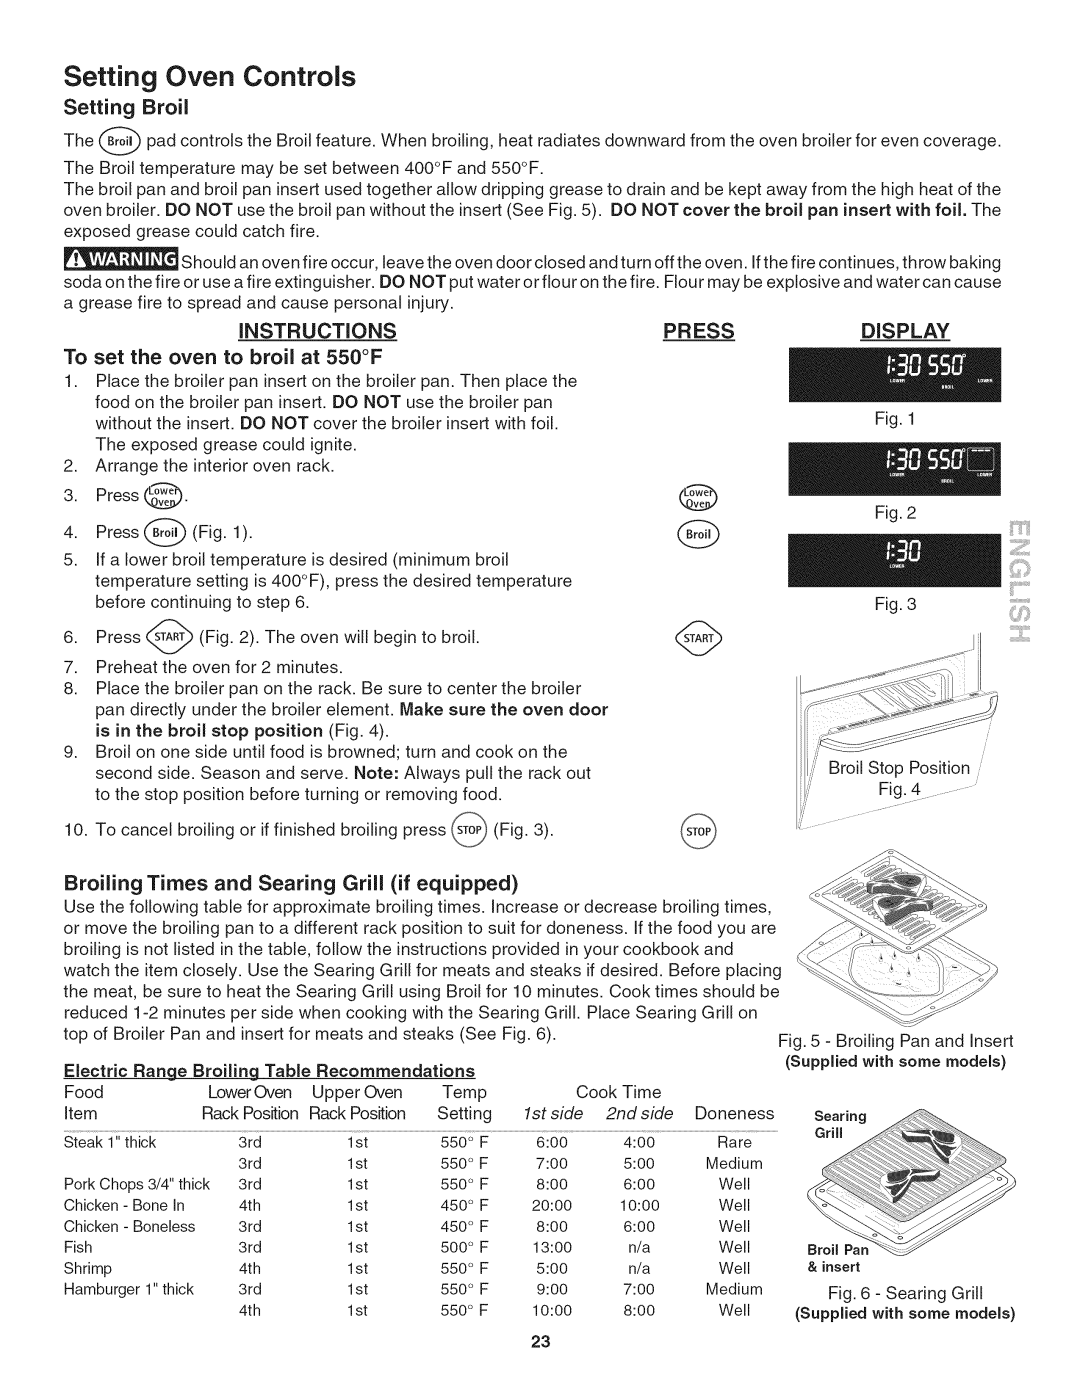 Kenmore 790. 9802 manual Setting Oven, Controls, Broil, Instructionspress, To set the oven to broil at 550F 